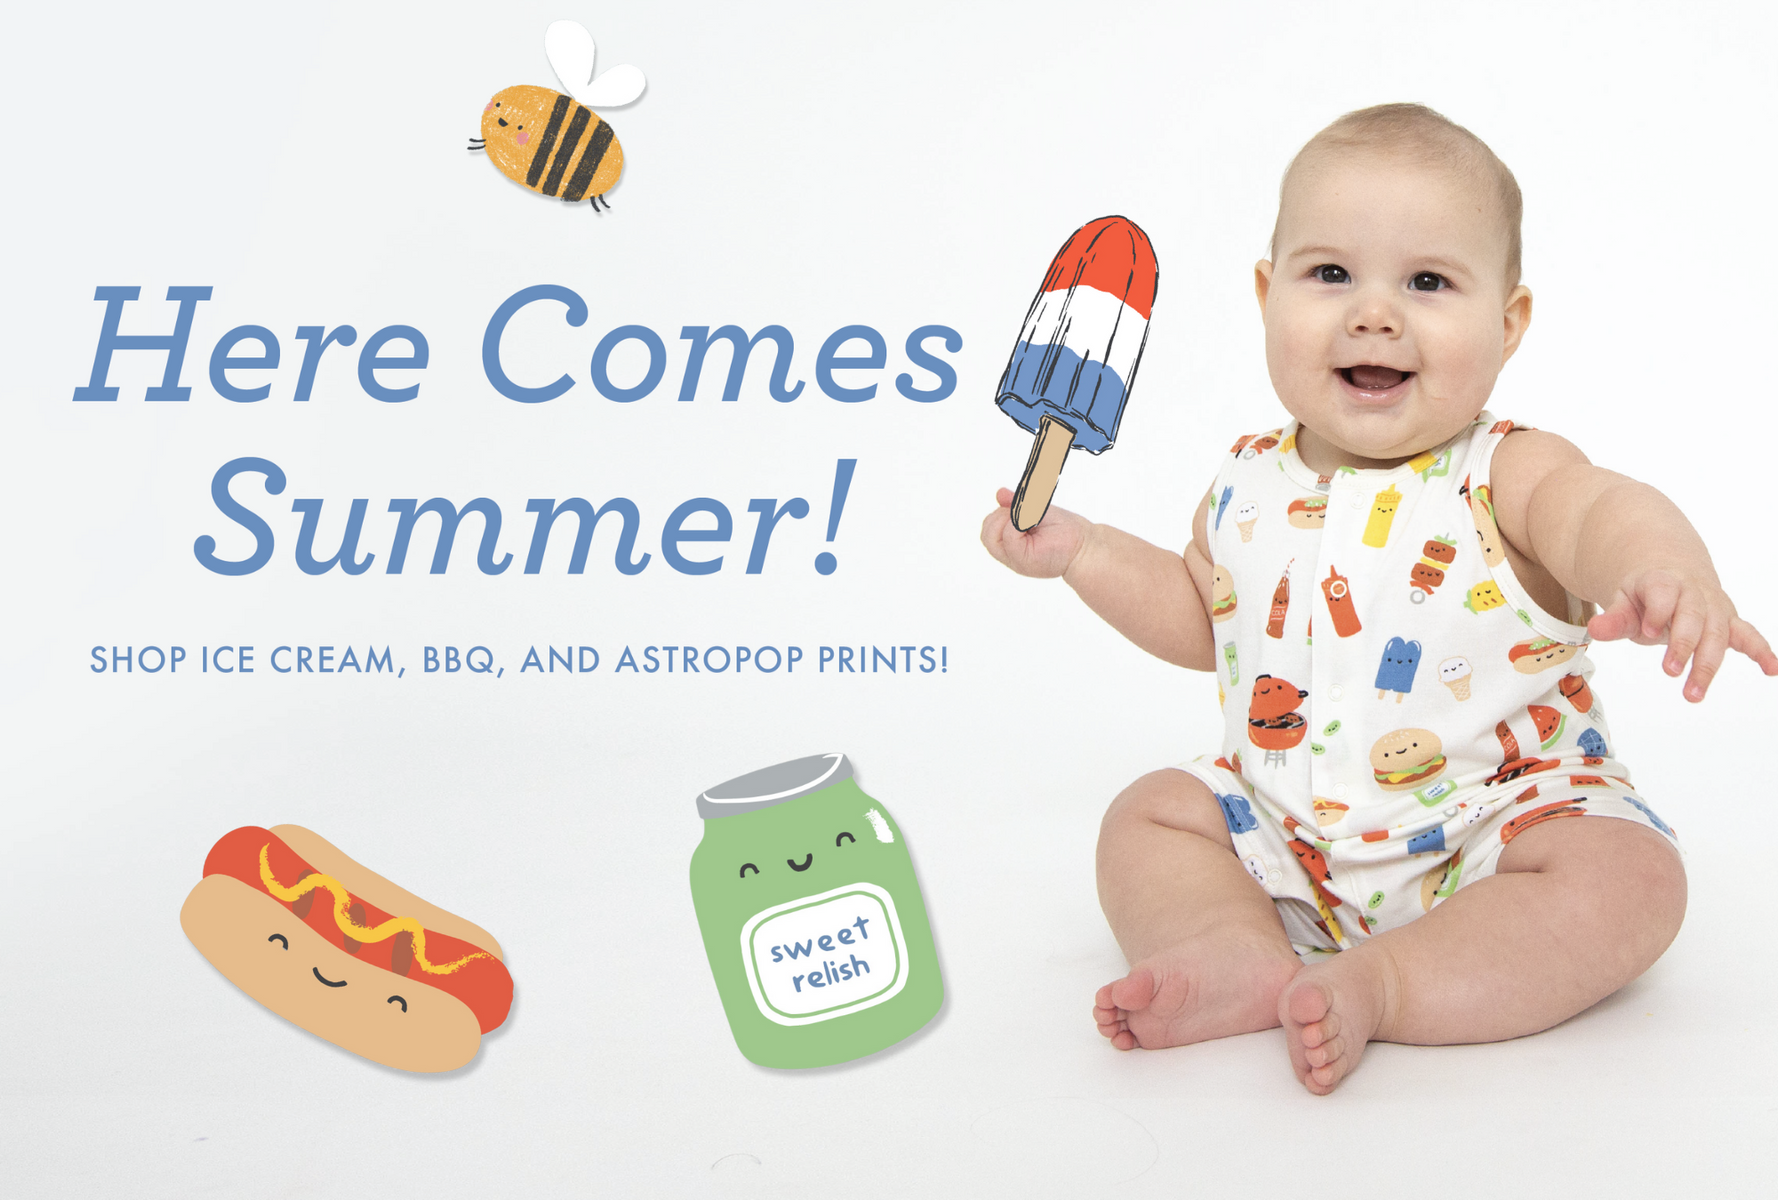 Baby holding a popsicle dress in a bbq illustrator print outfit - "Here Comes Summer"